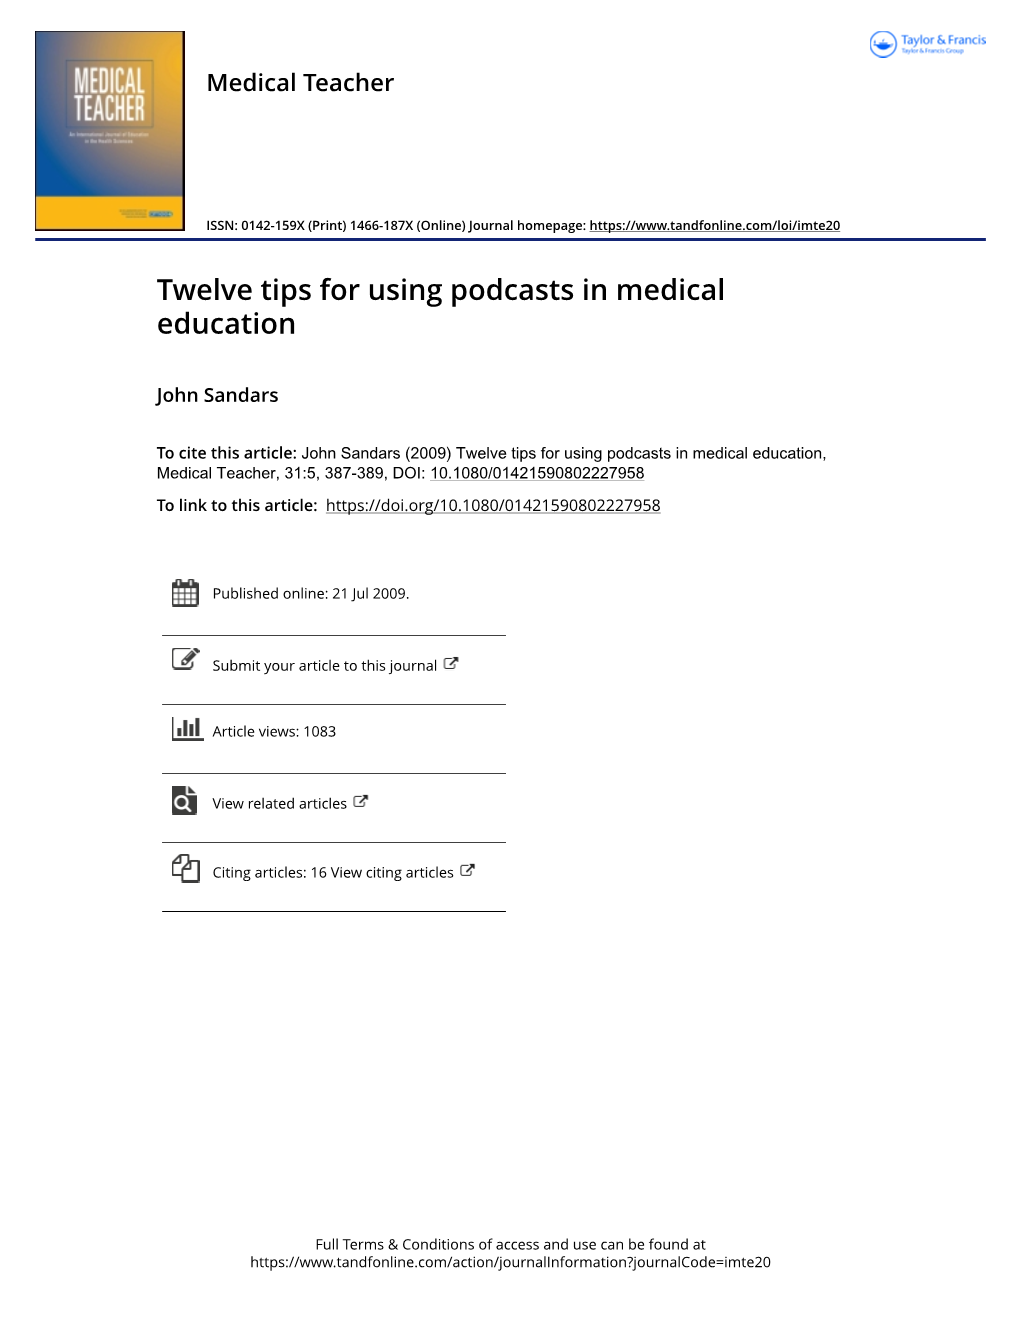 Twelve Tips for Using Podcasts in Medical Education